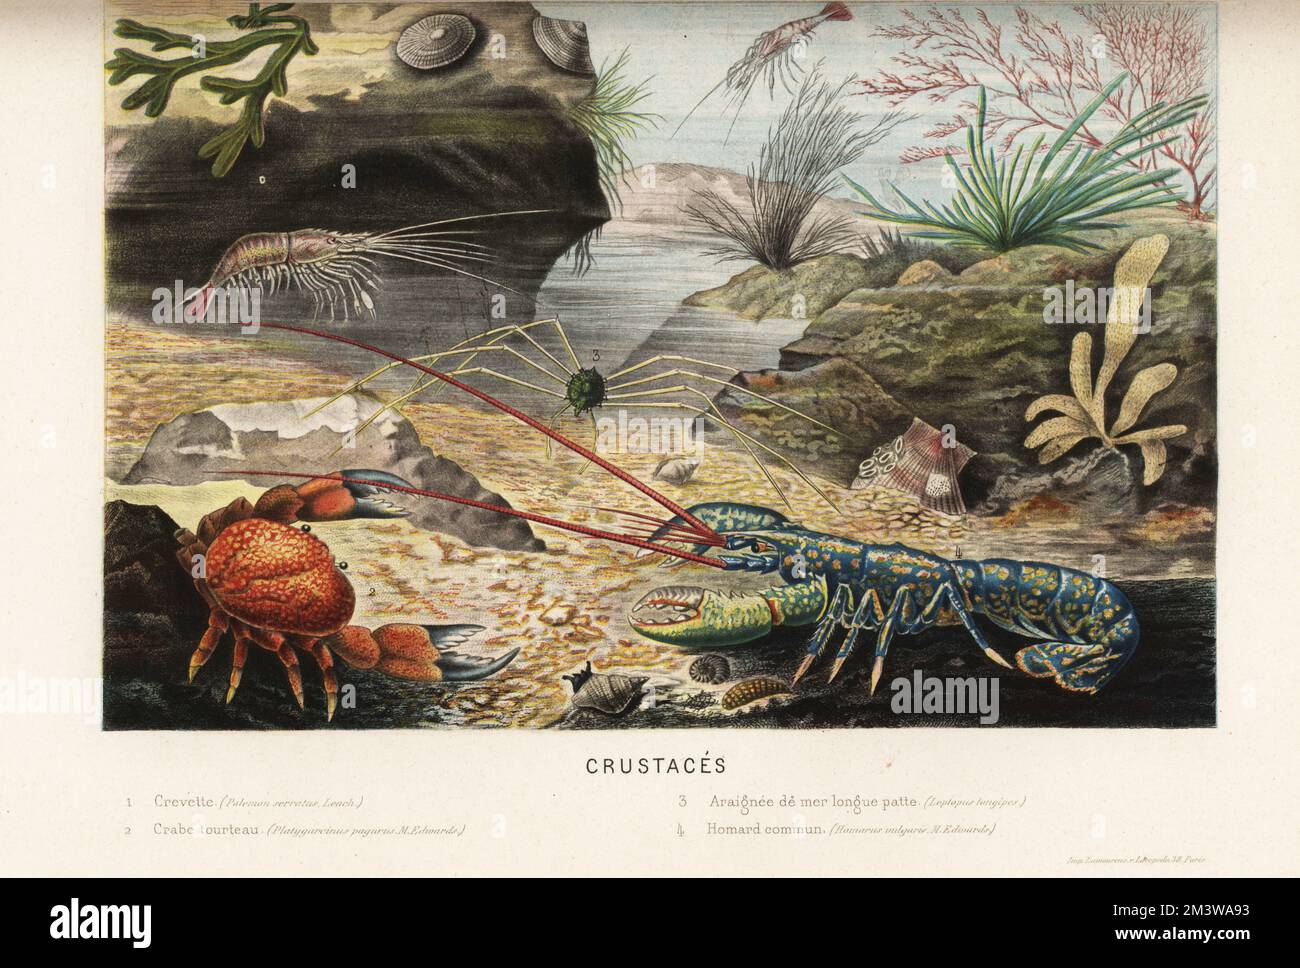 Prawn, Palaemon serratus 1, edible crab, Cancer pagurus 2, spider crab, Phalangipus longipes3 , and European lobster, Homarus gammarus 4. Crevette, crabe tourteau, araignee de mer longue patte, homard commun. Chromolithograph from Alfred Fredol’s Le Monde de la Mer, the World of the Sea, edited by Olivier Fredol, Librairie Hachette et. Cie., Paris, 1881. Alfred Fredol was the pseudonym of French zoologist and botanist Alfred Moquin-Tandon, 1804-1863. Stock Photo